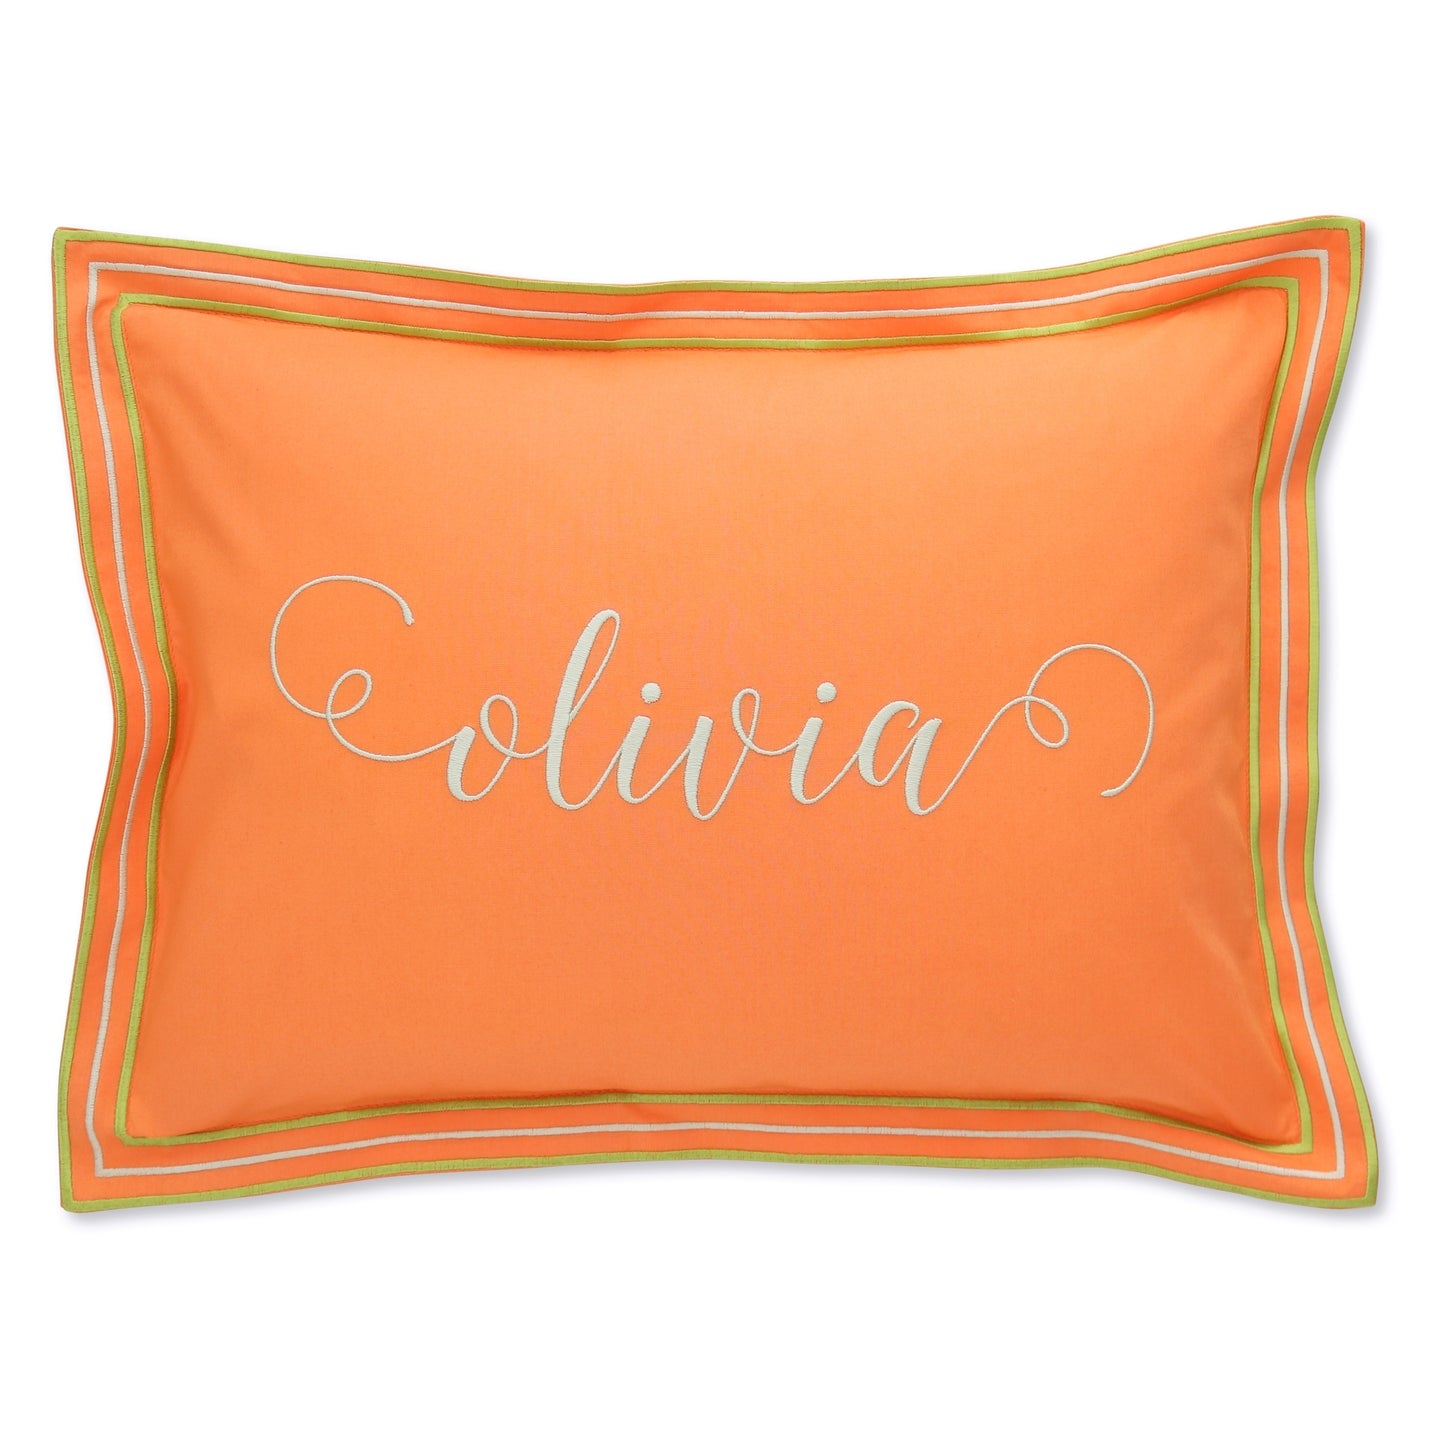 percale boudoir sham in Melon with 3 line border and name Olivia, in script font